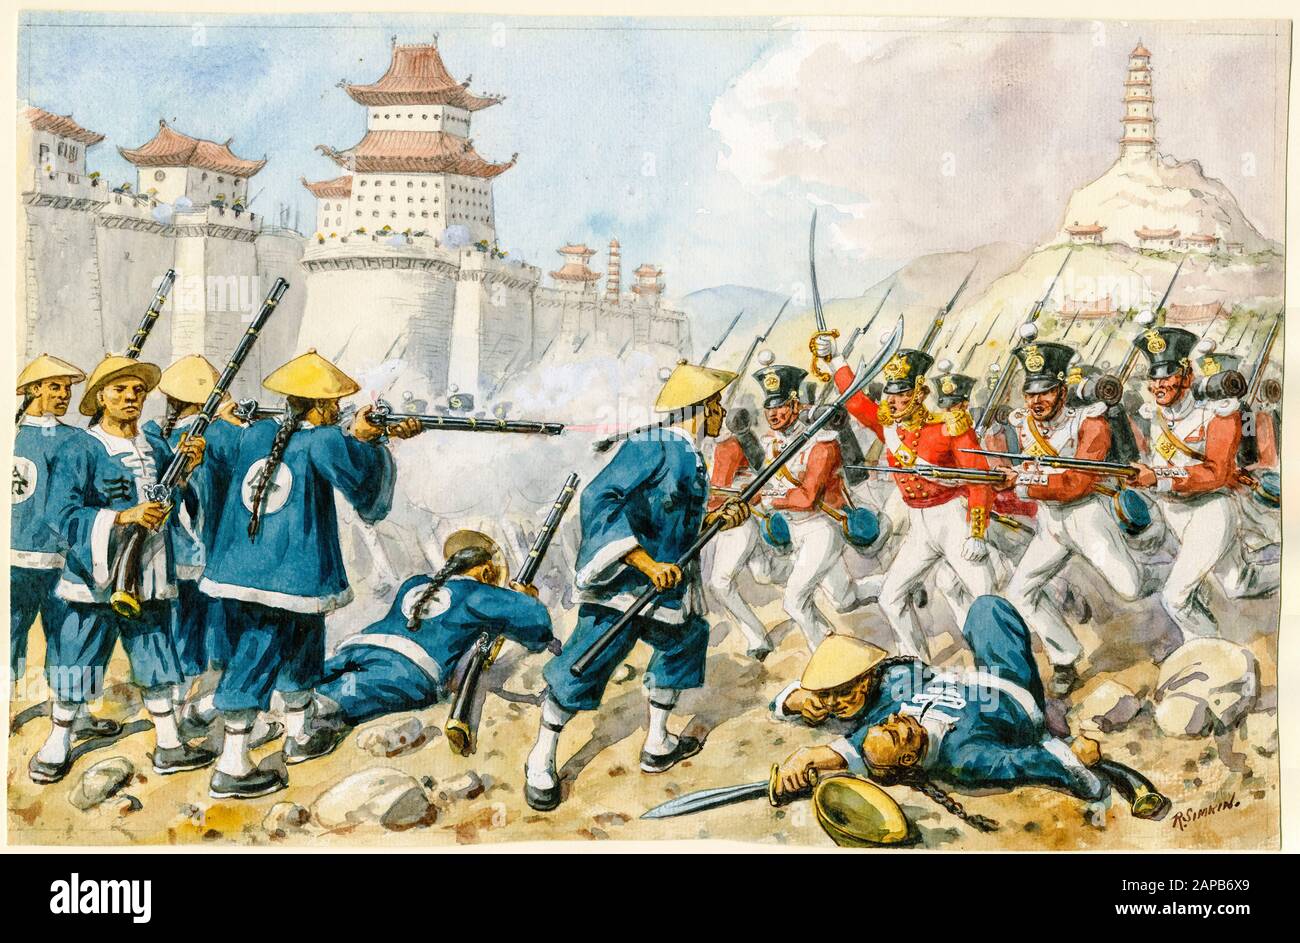 First Opium War, The 98th Regiment of Foot at the Attack on Chin-Kiang-Foo, 21st July 1842, painting by Richard Simkin, unknown date Stock Photo